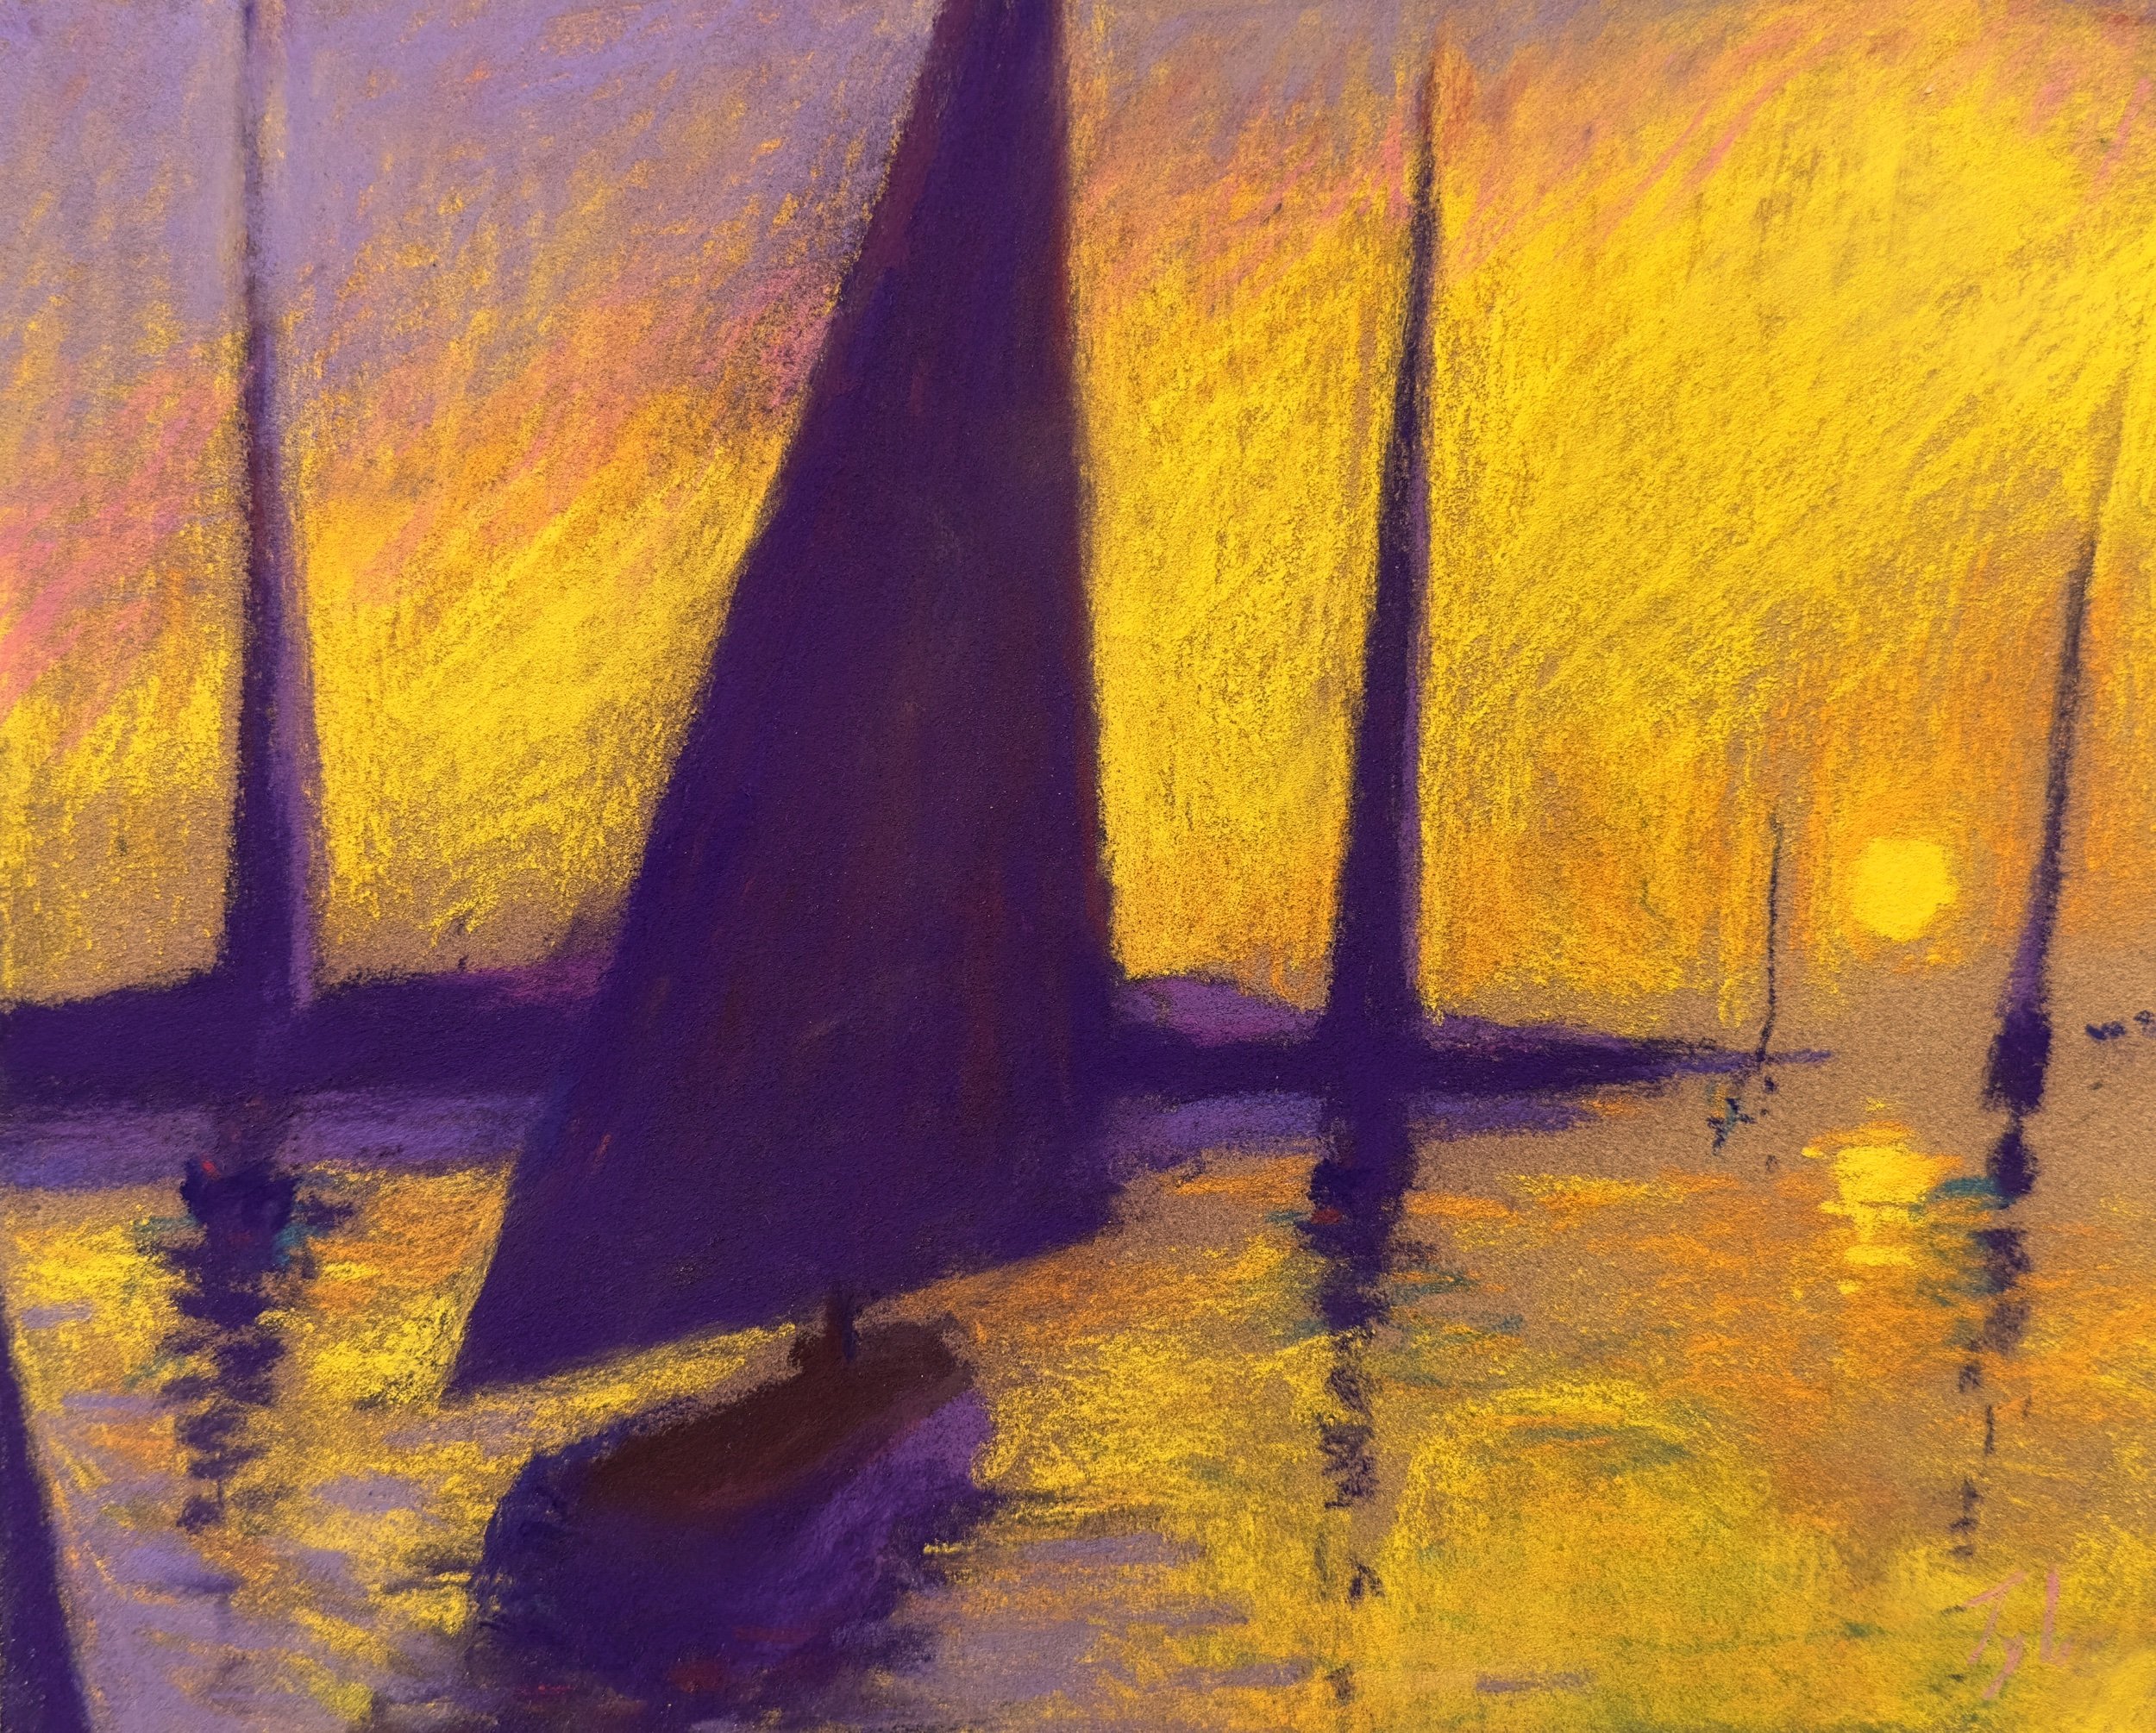  “Sailboats: Last Light”    pastel on sanded paper    8” x 10”    private collection 